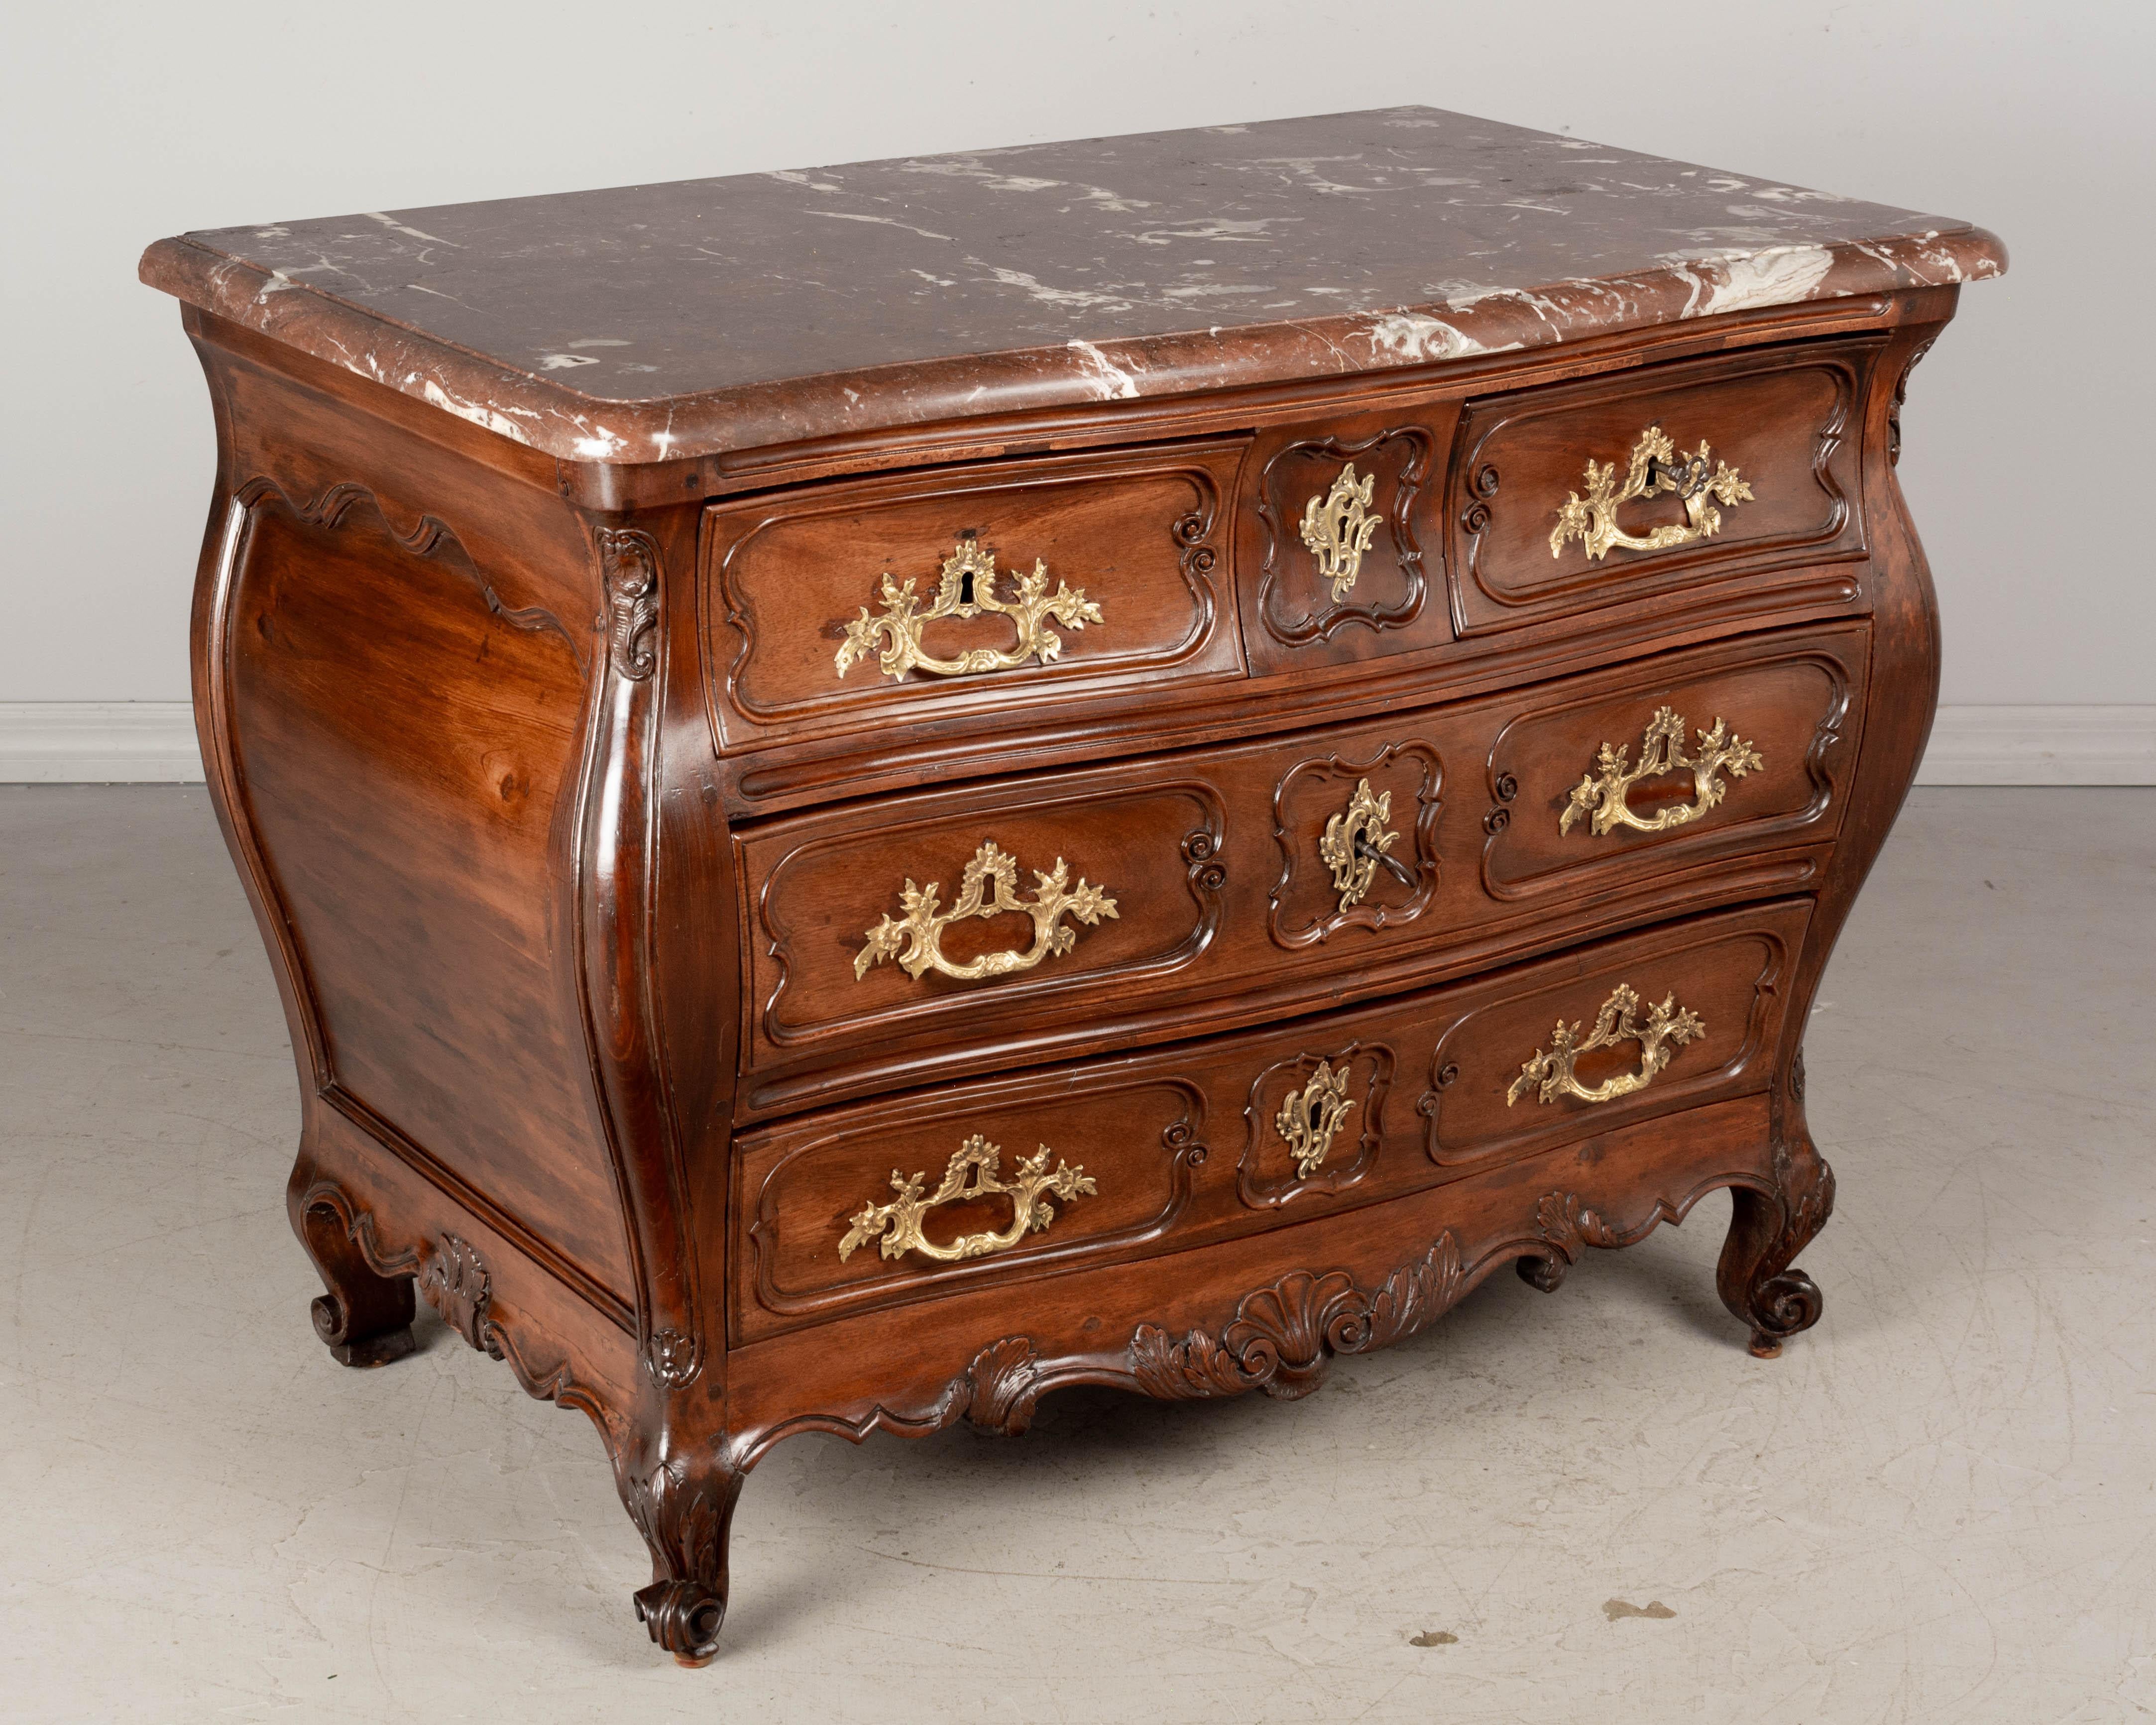 An 18th century French Louis XV commode, or chest of drawers, from the Bordeaux region made of solid mahogany. Nice proportions and bombé form with serpentine front. Original Rouge Royale marble top is 1.25